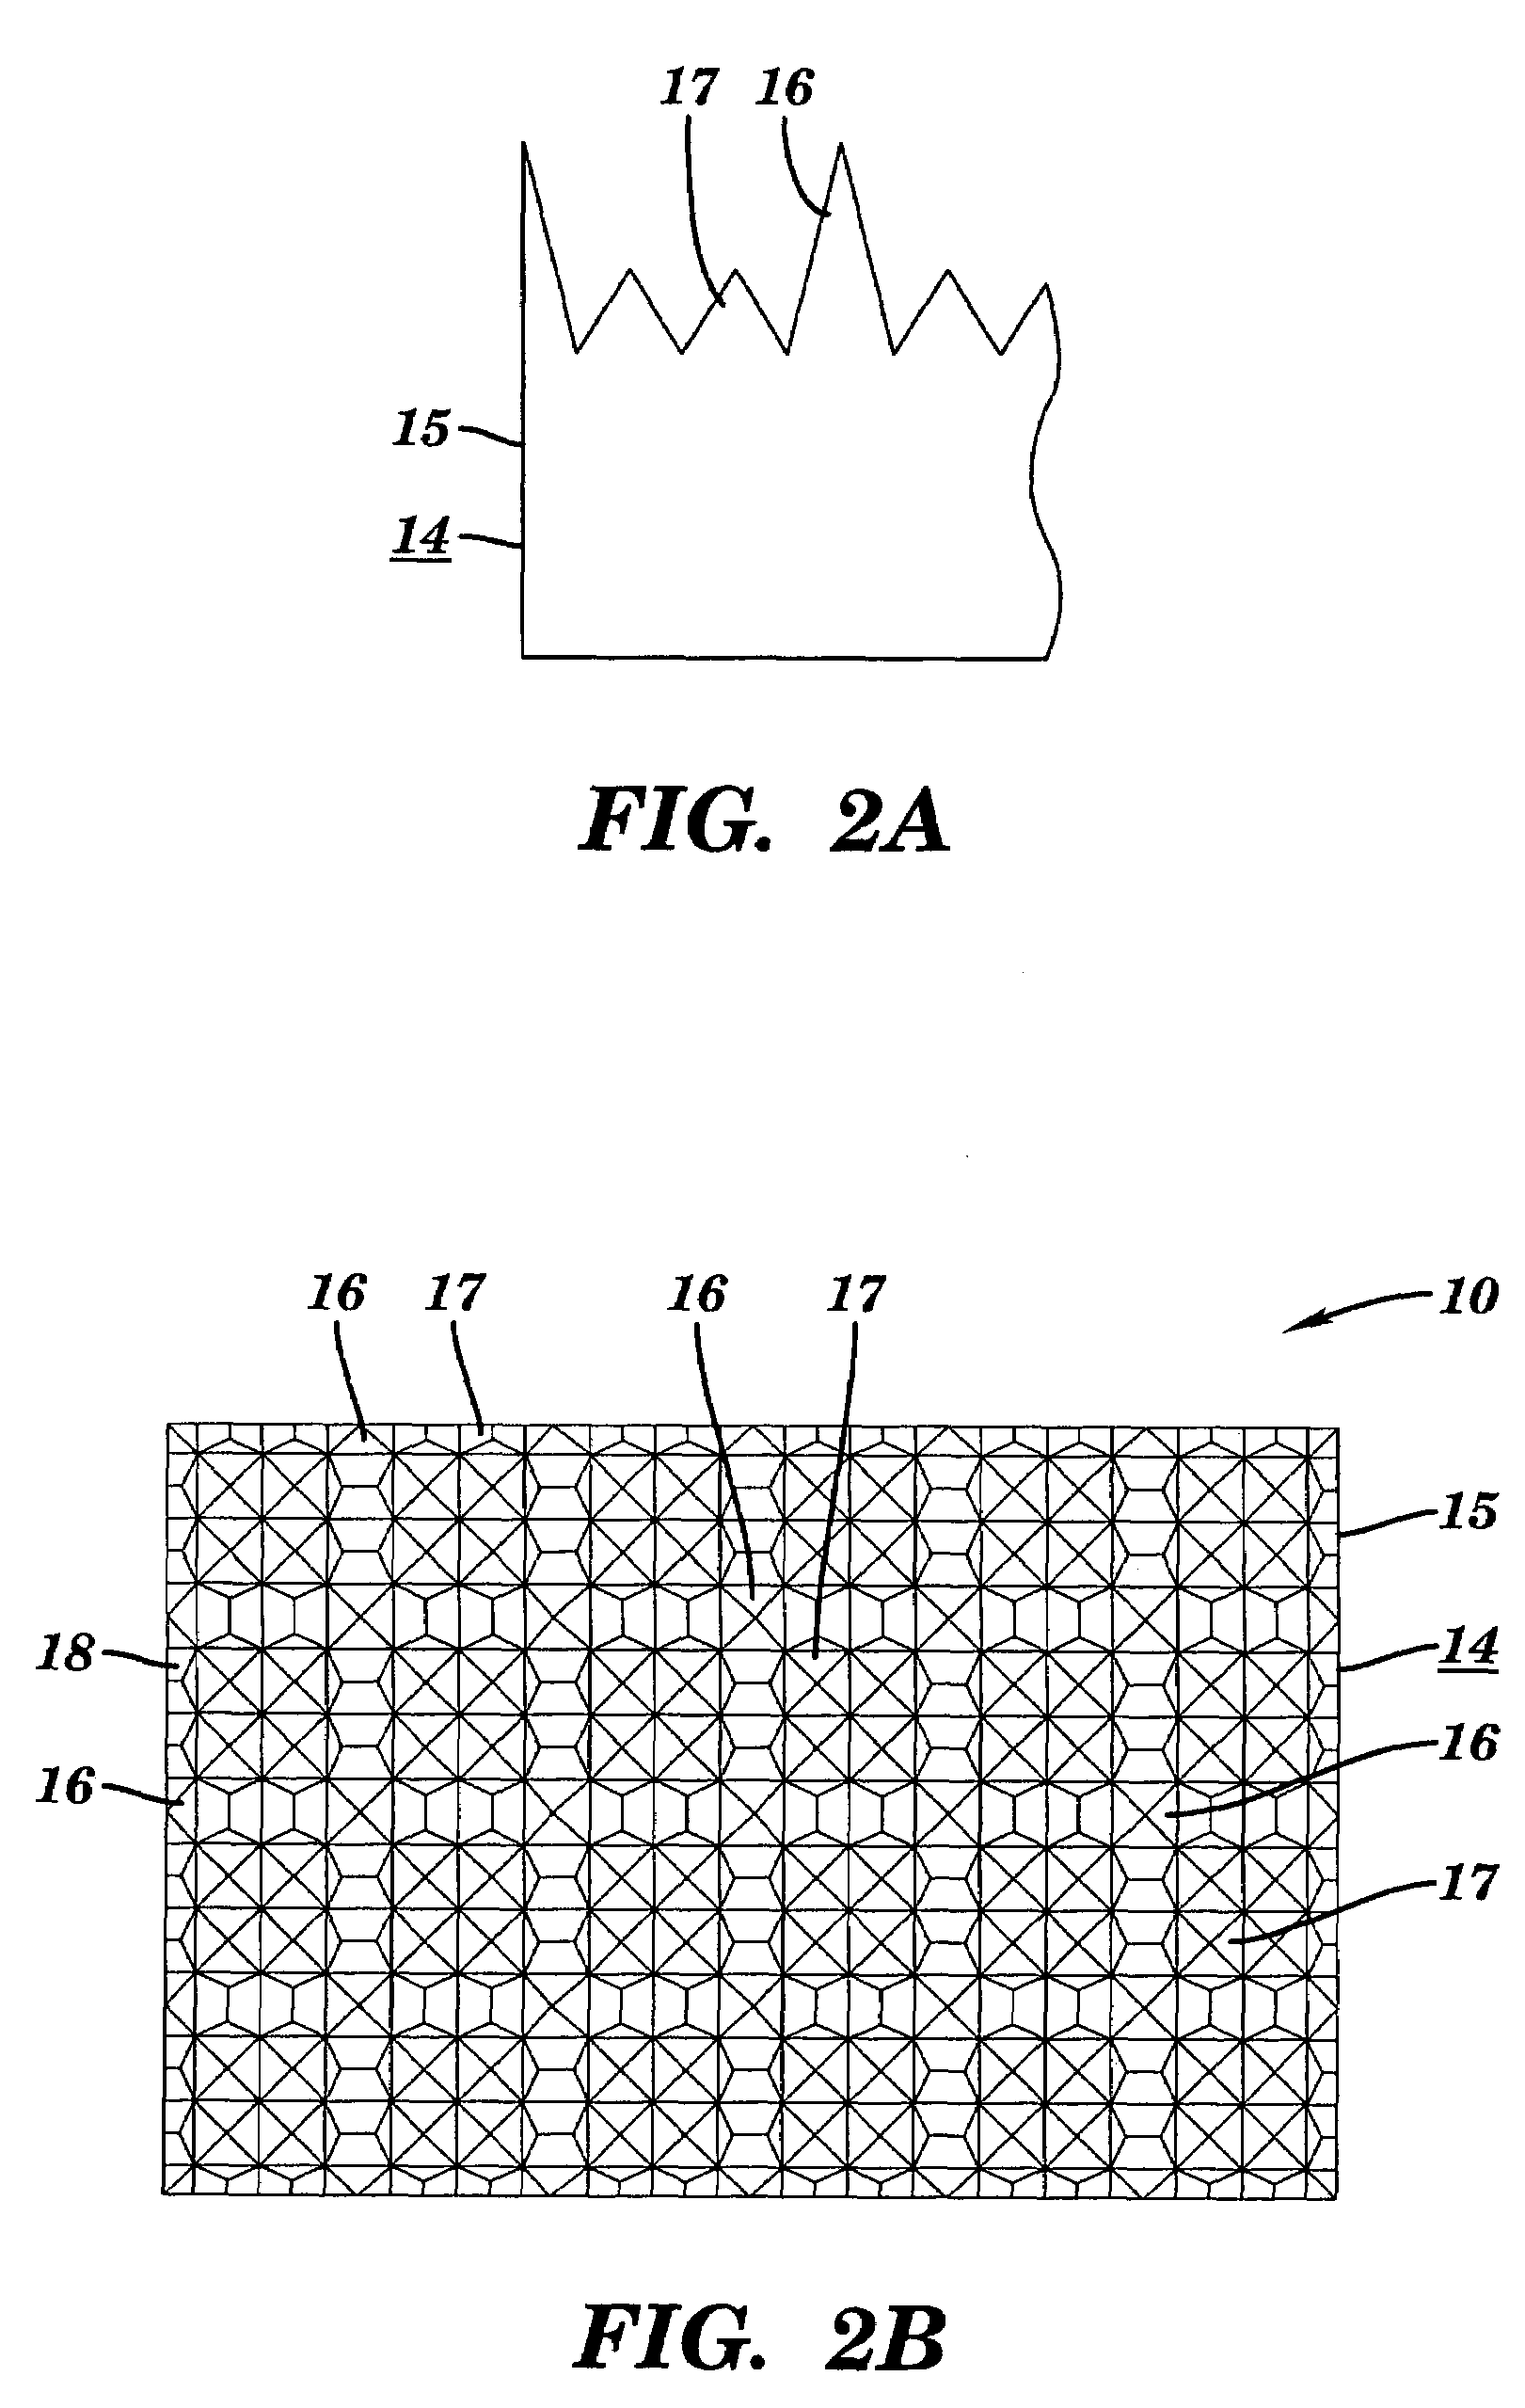 Article and method for cleaning uneven, variable geometry surfaces of electronic devices, internal electronic assemblies, or the like